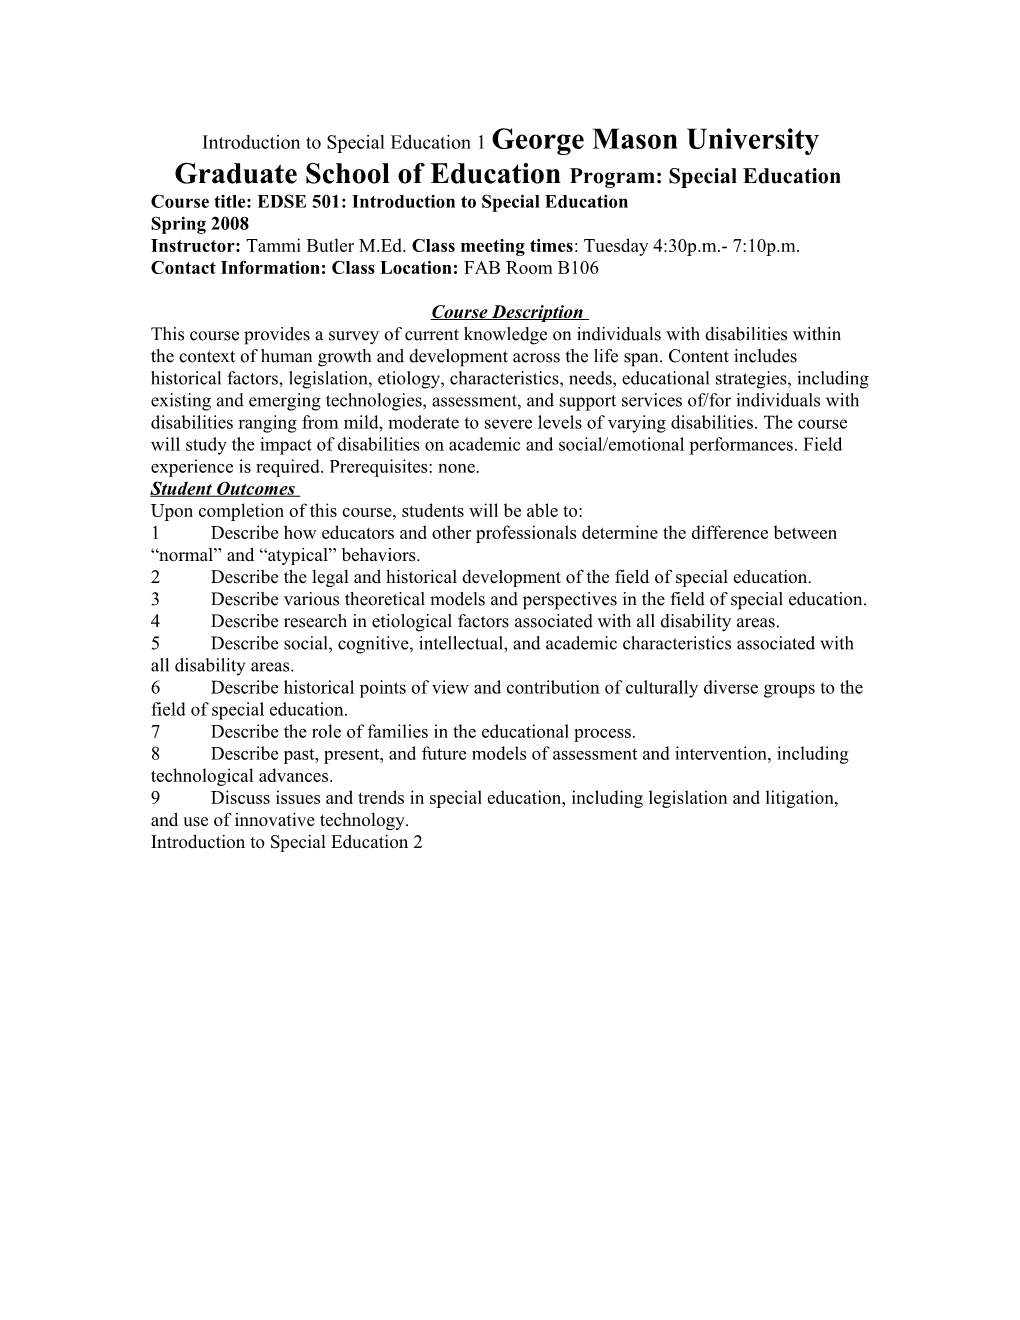 Introduction to Special Education 1 George Mason University Graduate School of Education